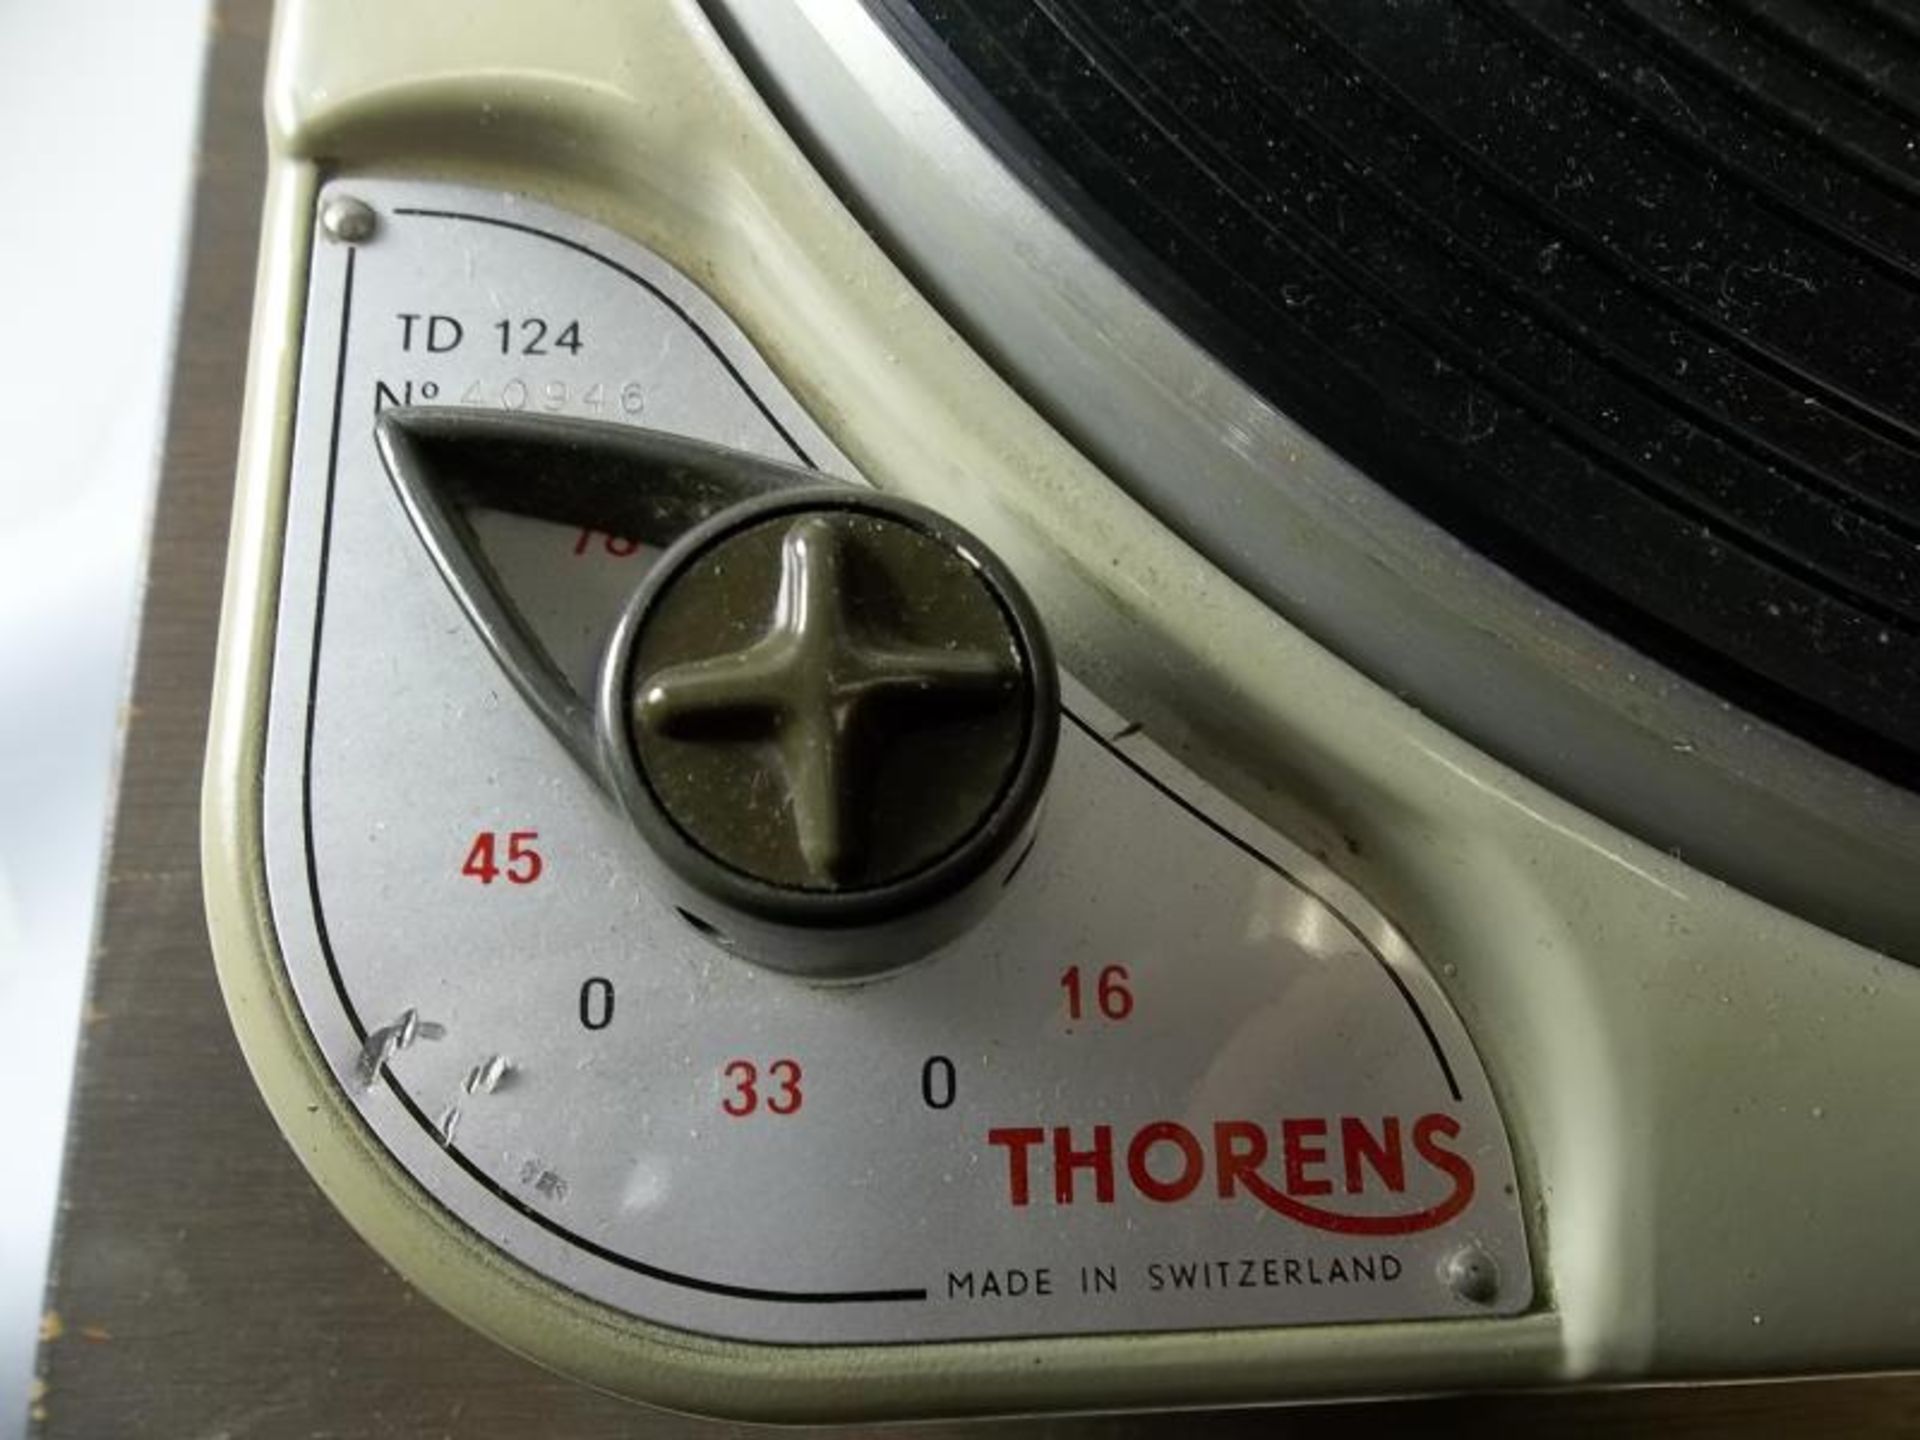 Thorens TD-124 turn table, #40946, made in Switzerland, 16, 33, 45, 78, no arm board or arm, base is - Image 3 of 3